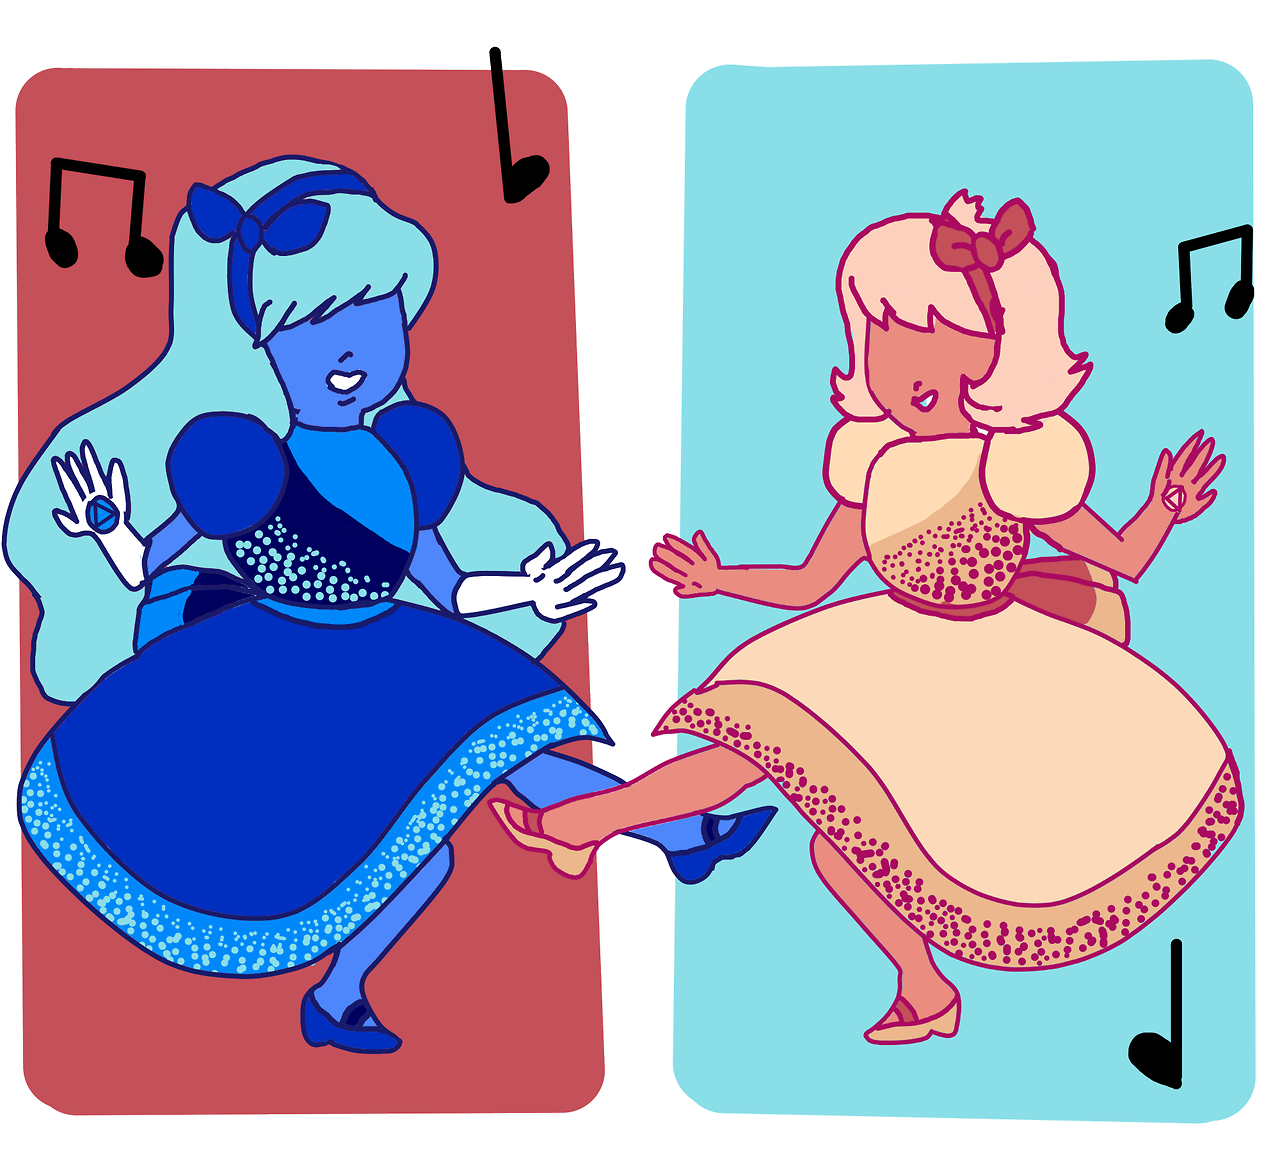 ‘Hey Ruby! Come dance with us!’ I guess this is an AU? Dance AU anyone? Sapphire and Paddy doing the swing dance is the cutest thing.